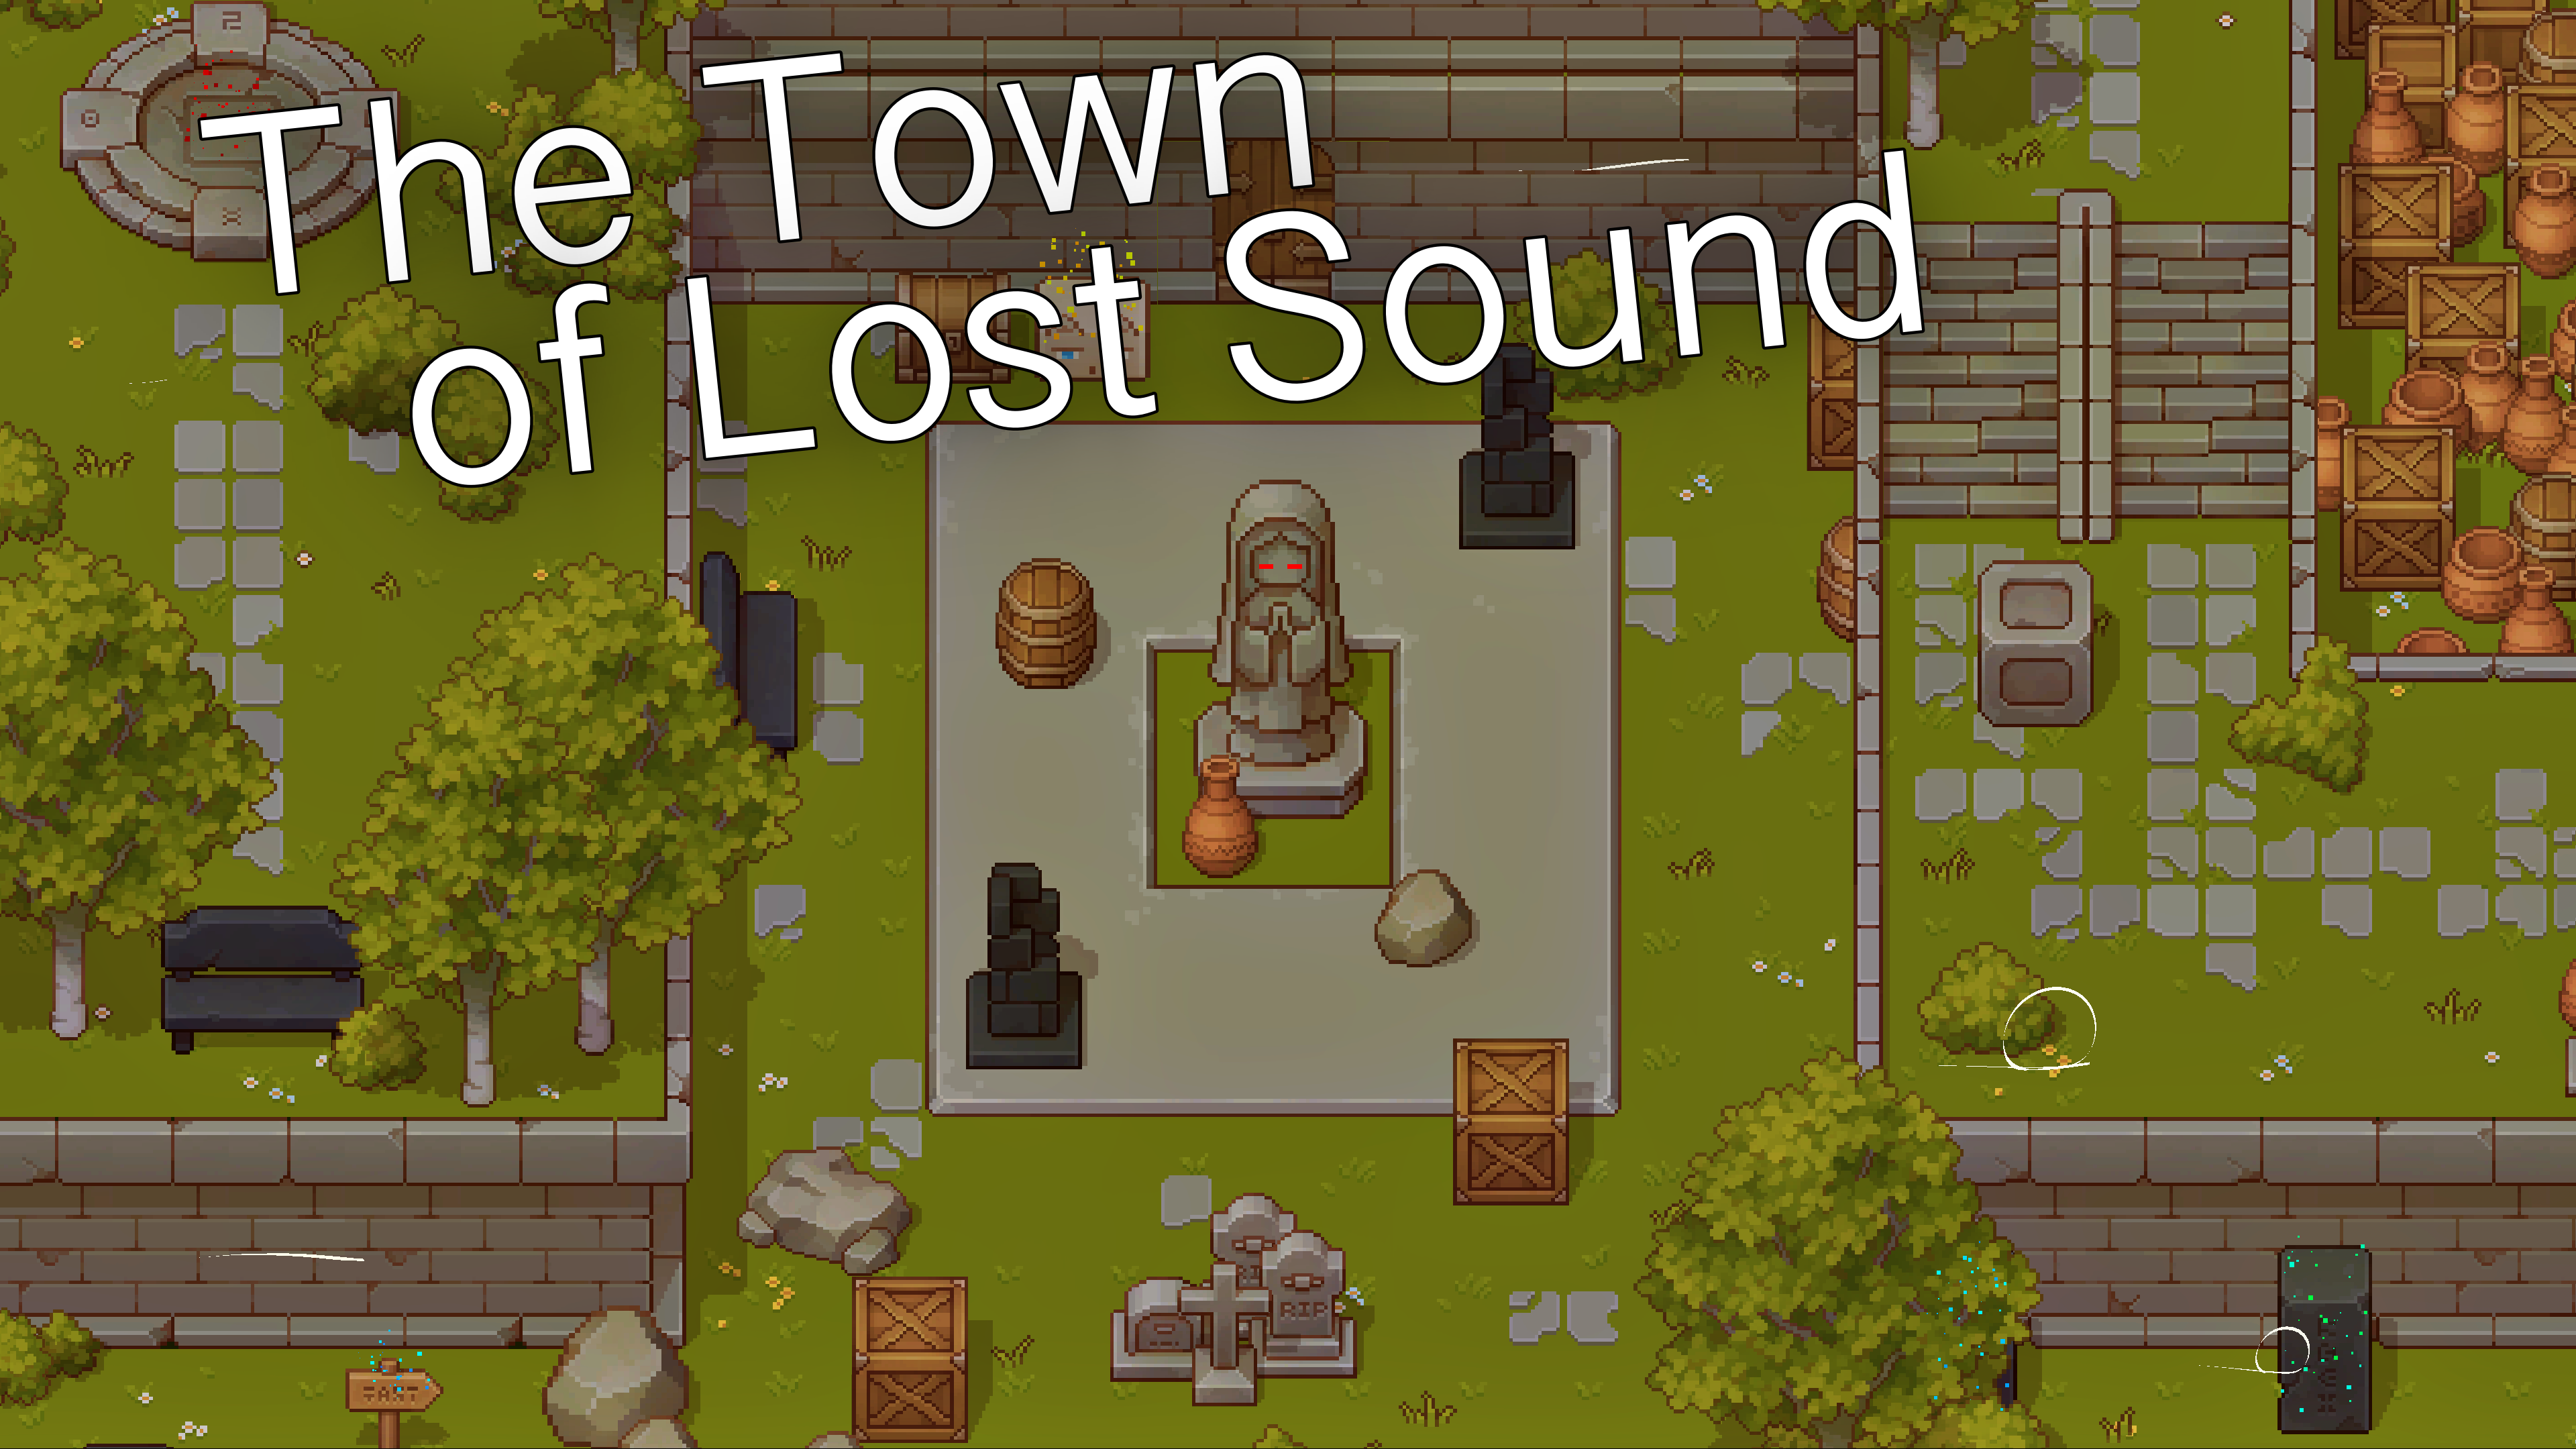 The Town of Lost Sound